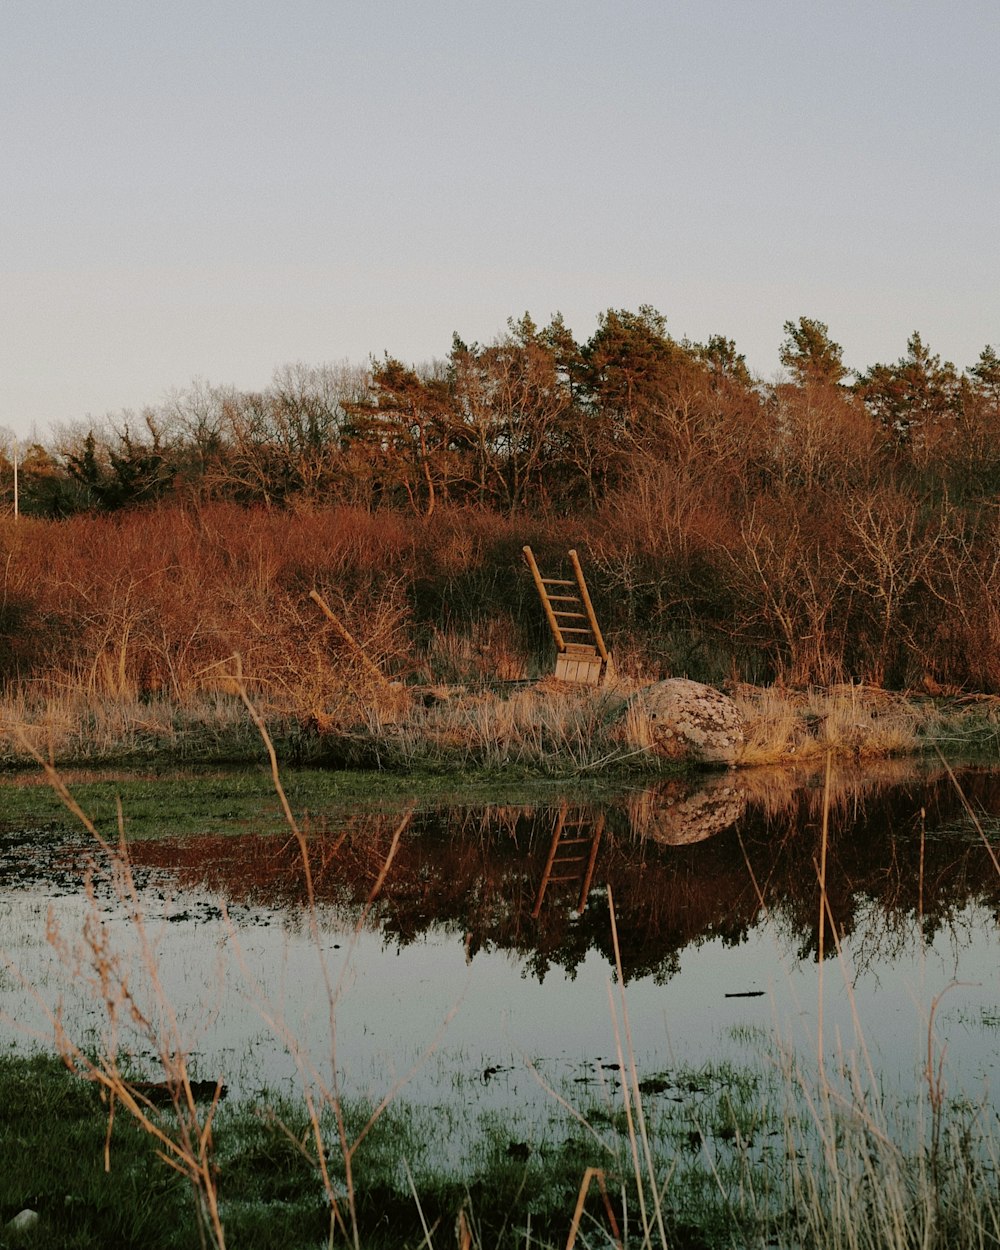 a chair sitting in the middle of a field next to a body of water